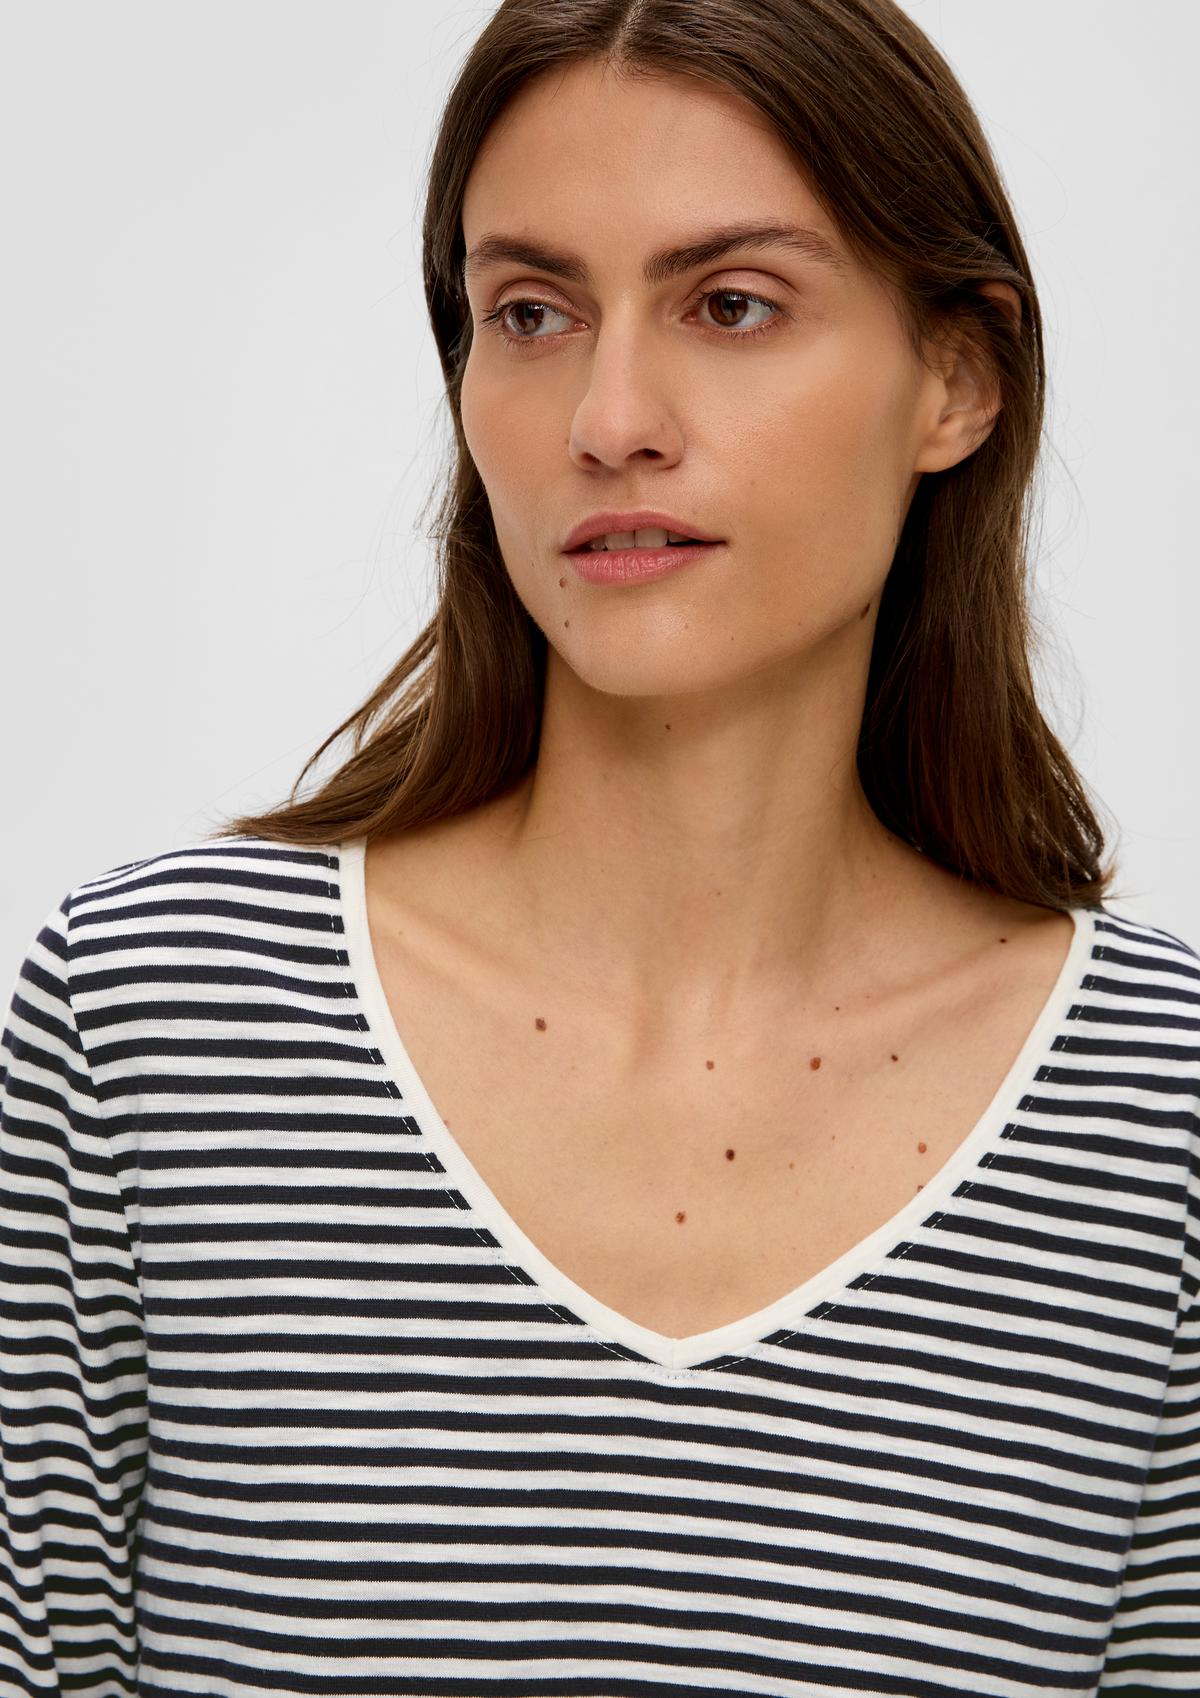 s.Oliver Striped long sleeve top with a rolled hem